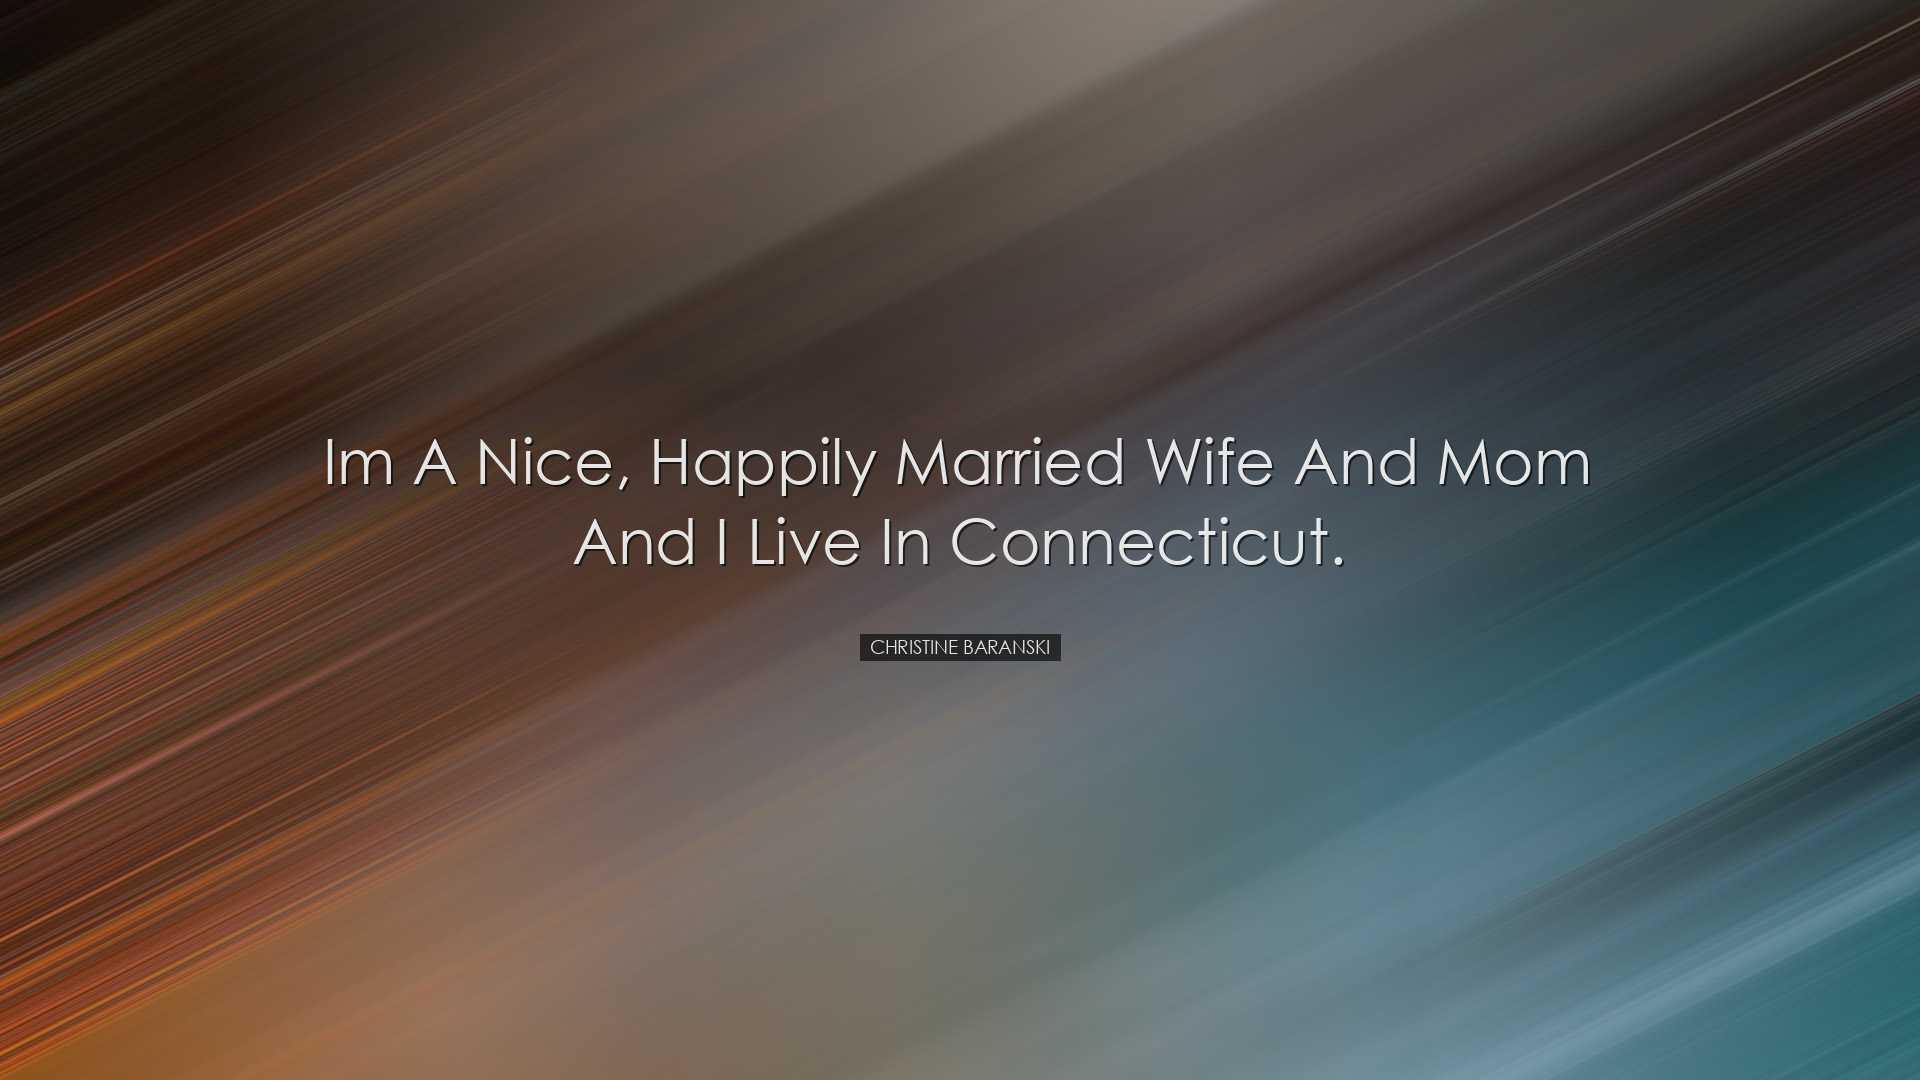 Im a nice, happily married wife and mom and I live in Connecticut.